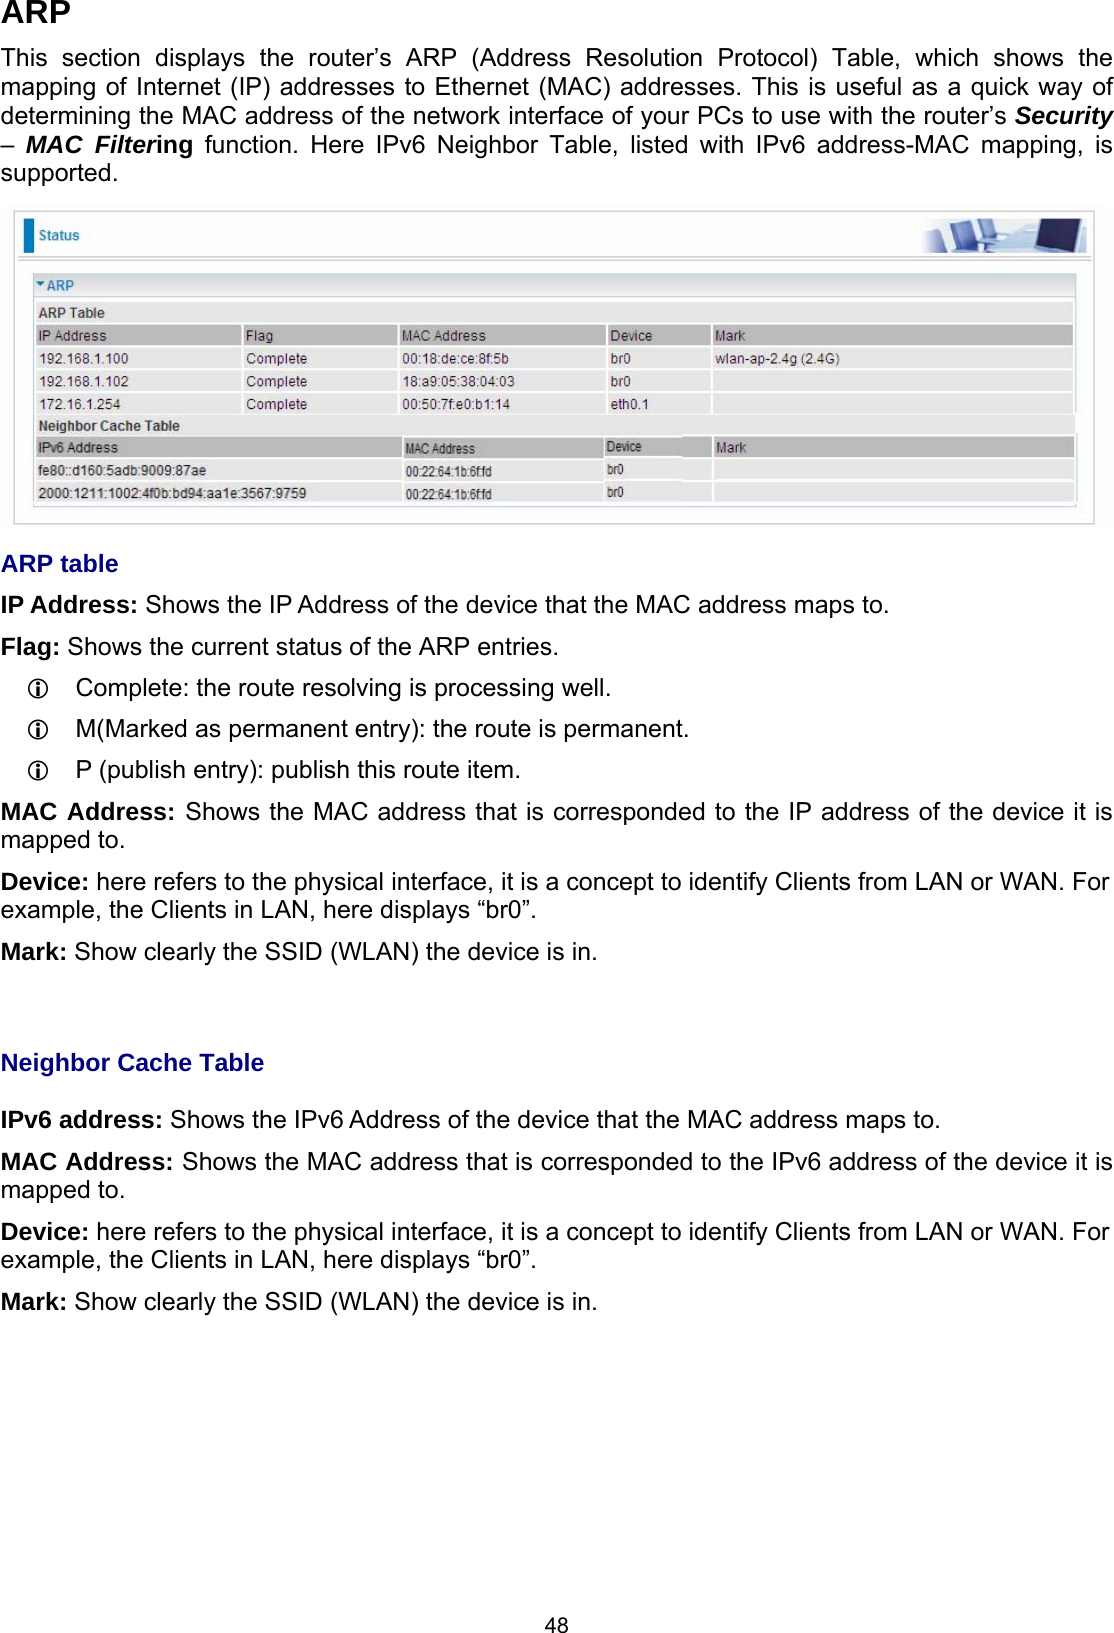  48 ARP  This section displays the router’s ARP (Address Resolution Protocol) Table, which shows the mapping of Internet (IP) addresses to Ethernet (MAC) addresses. This is useful as a quick way of determining the MAC address of the network interface of your PCs to use with the router’s Security –  MAC Filtering function. Here IPv6 Neighbor Table, listed with IPv6 address-MAC mapping, is supported.    ARP table IP Address: Shows the IP Address of the device that the MAC address maps to. Flag: Shows the current status of the ARP entries.   Complete: the route resolving is processing well.   M(Marked as permanent entry): the route is permanent.   P (publish entry): publish this route item. MAC Address: Shows the MAC address that is corresponded to the IP address of the device it is mapped to. Device: here refers to the physical interface, it is a concept to identify Clients from LAN or WAN. For example, the Clients in LAN, here displays “br0”. Mark: Show clearly the SSID (WLAN) the device is in.   Neighbor Cache Table  IPv6 address: Shows the IPv6 Address of the device that the MAC address maps to. MAC Address: Shows the MAC address that is corresponded to the IPv6 address of the device it is mapped to. Device: here refers to the physical interface, it is a concept to identify Clients from LAN or WAN. For example, the Clients in LAN, here displays “br0”. Mark: Show clearly the SSID (WLAN) the device is in.   